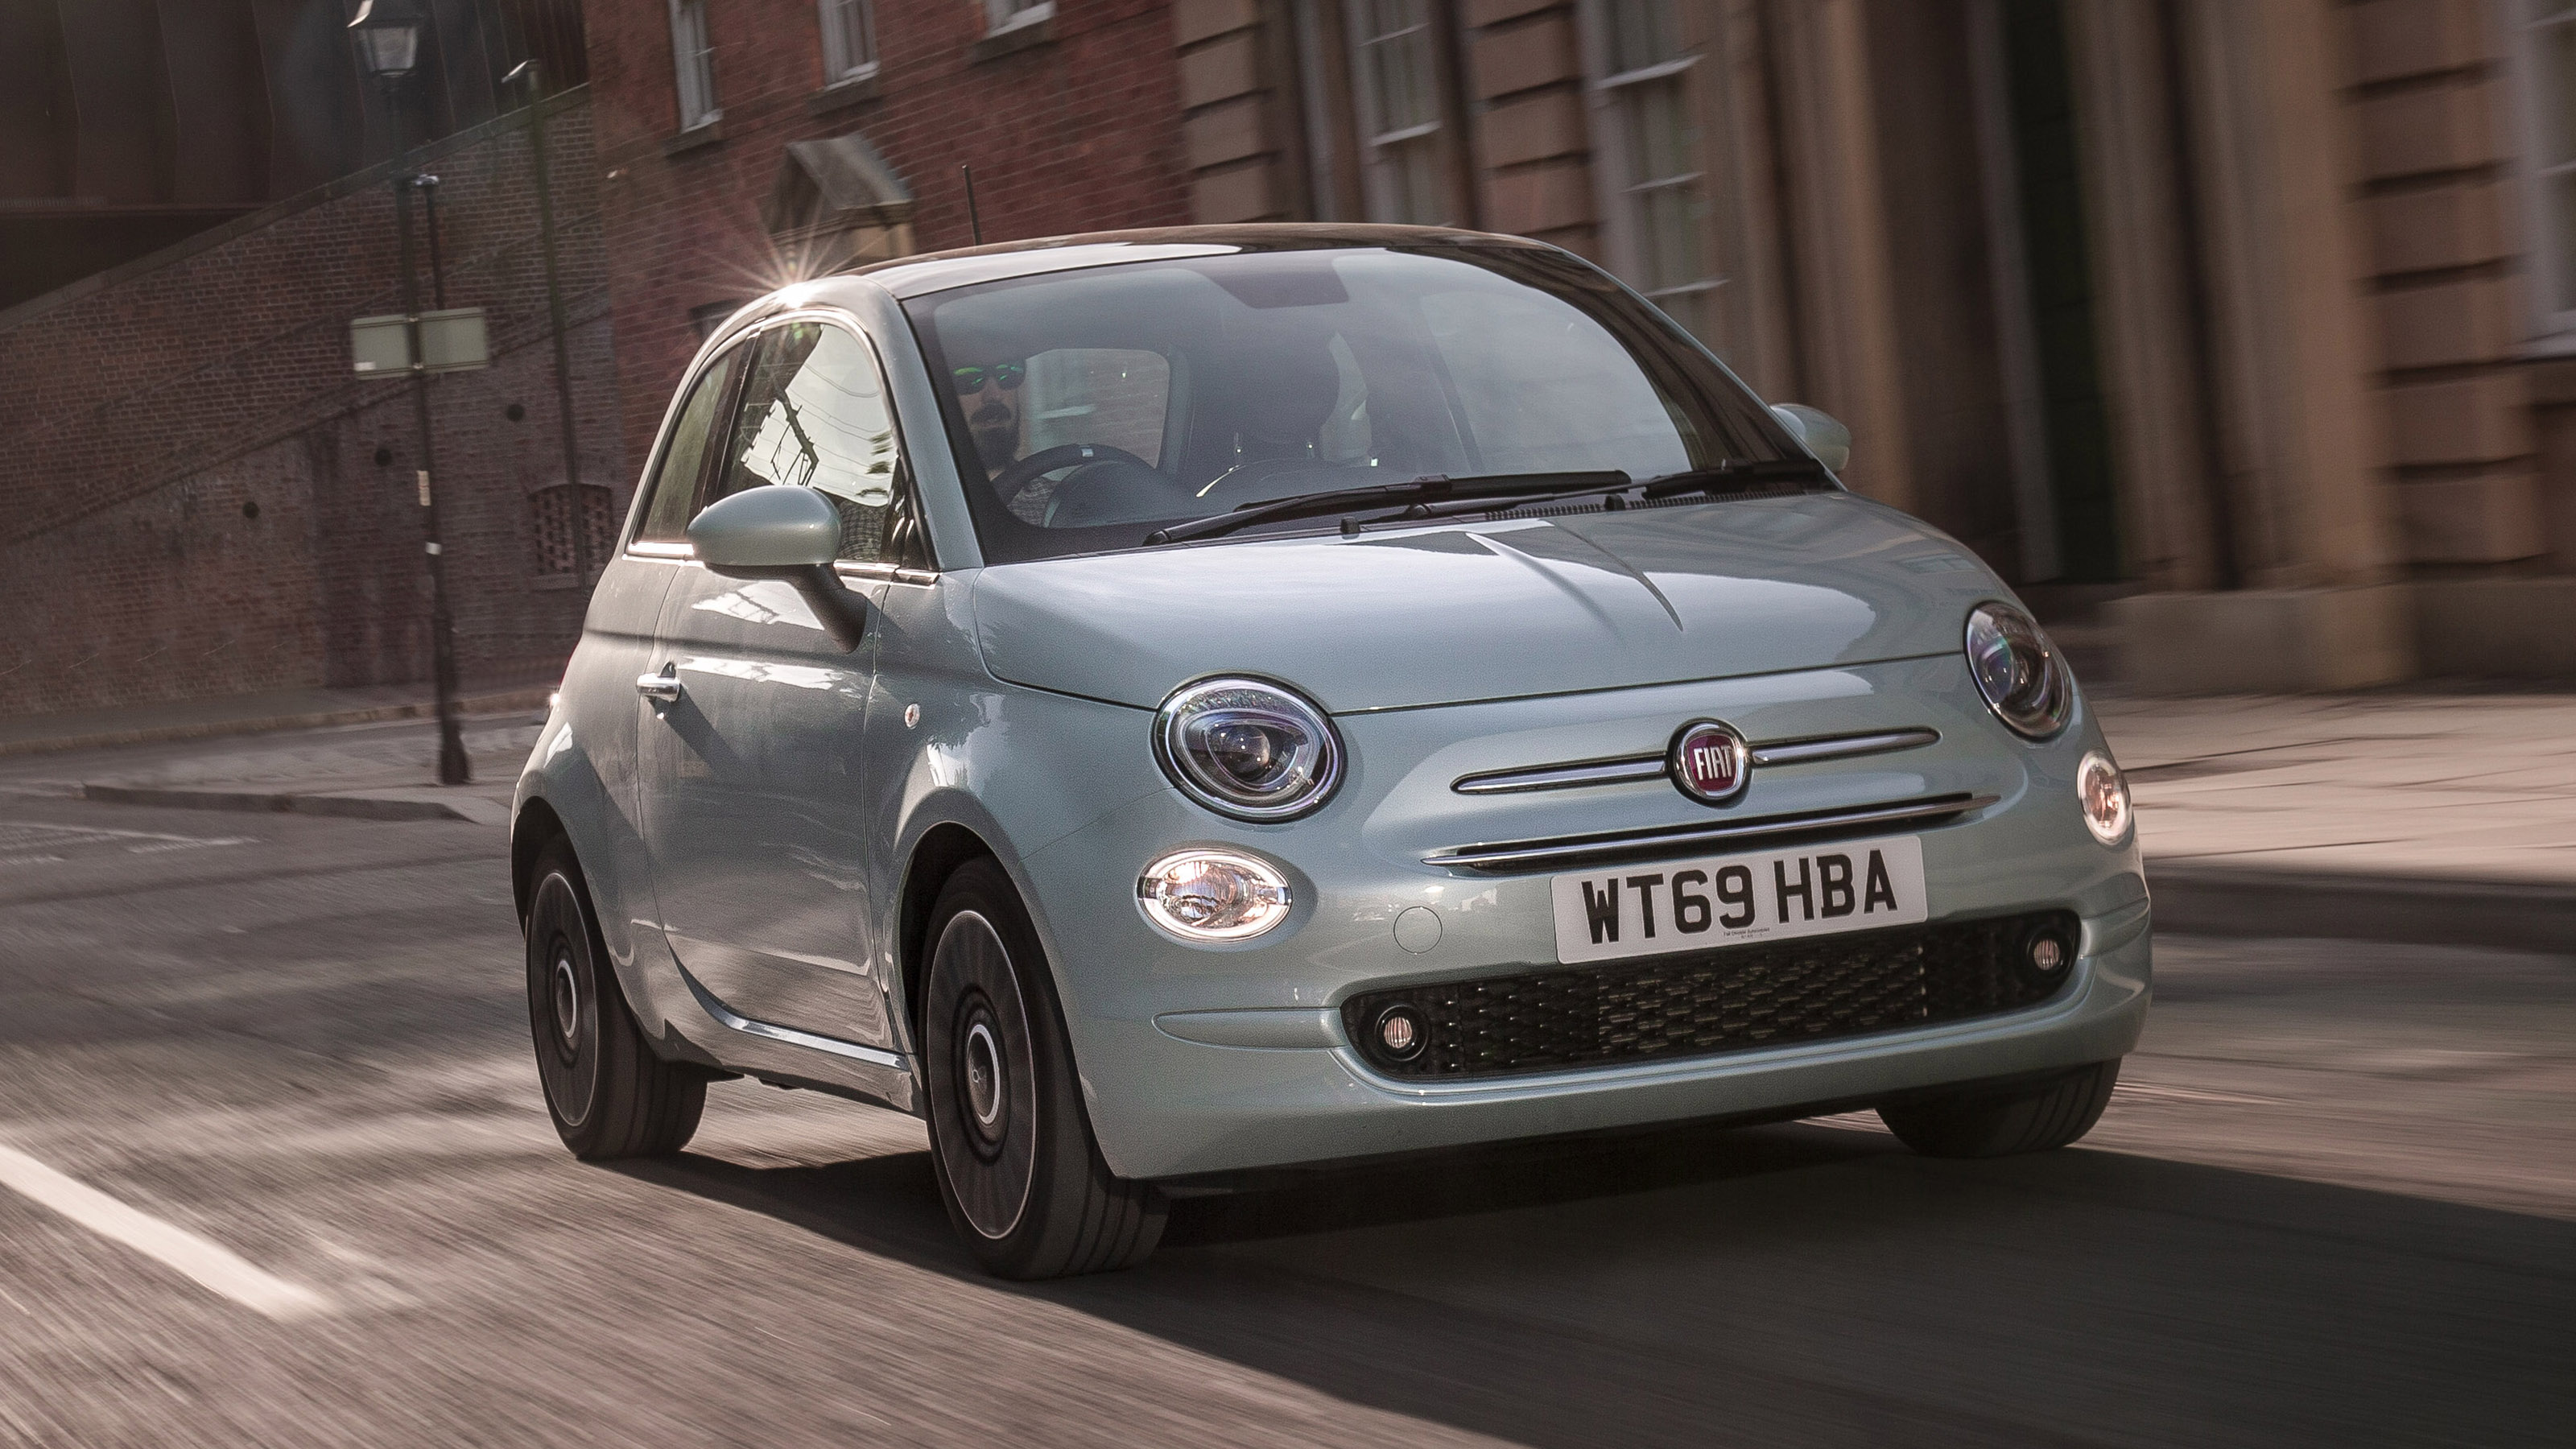 Used Fiat 500 byGucci Cars For Sale